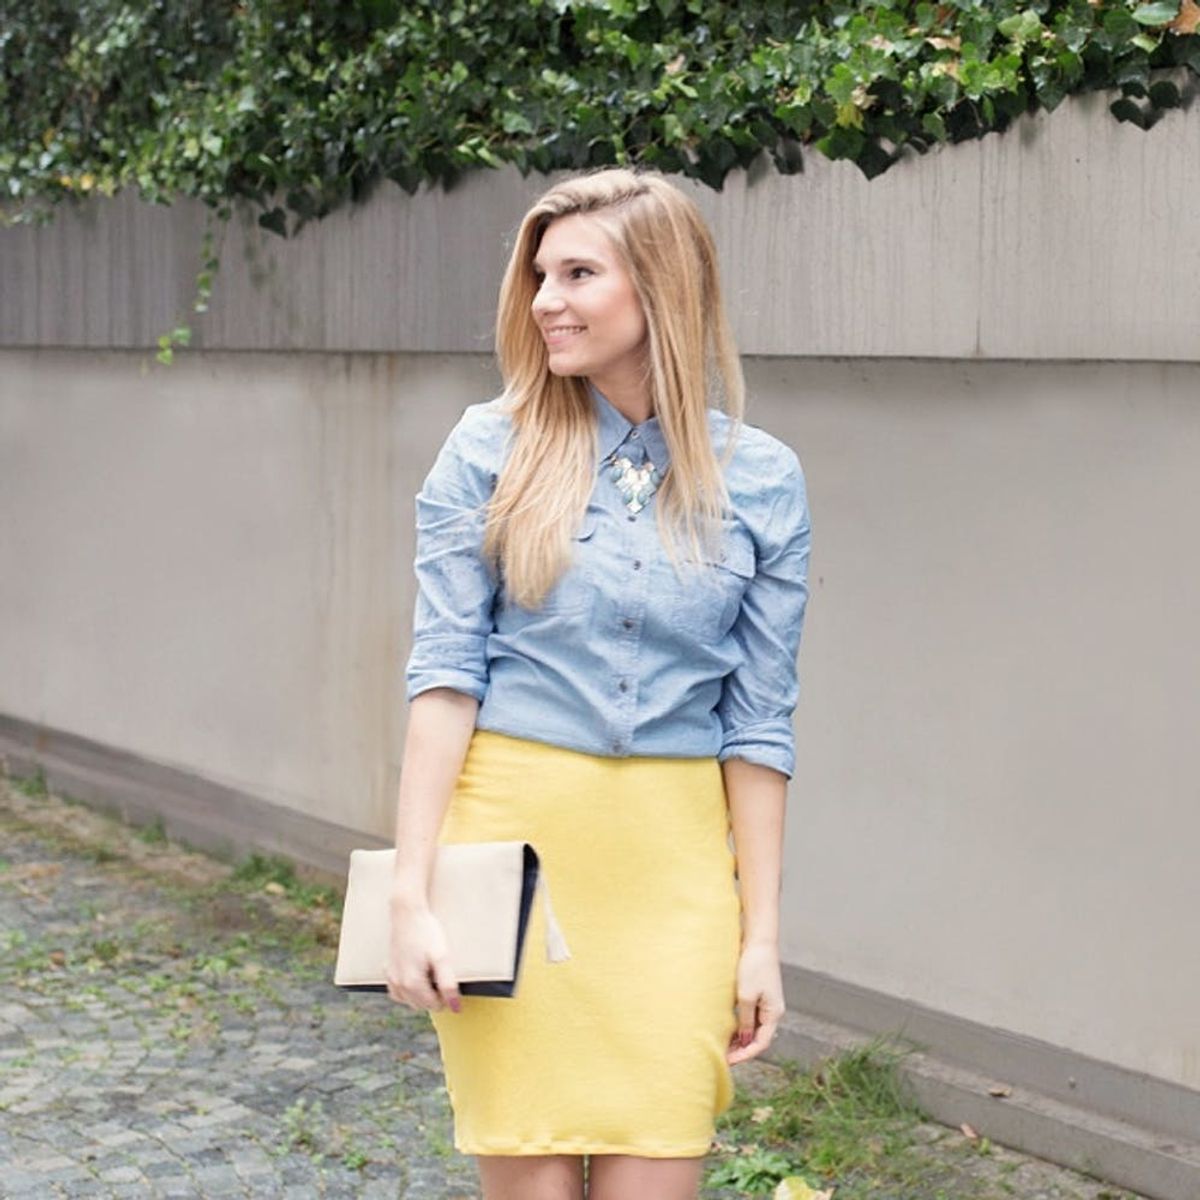 Sew Your Own Pencil Skirt in Less Than 30 Minutes